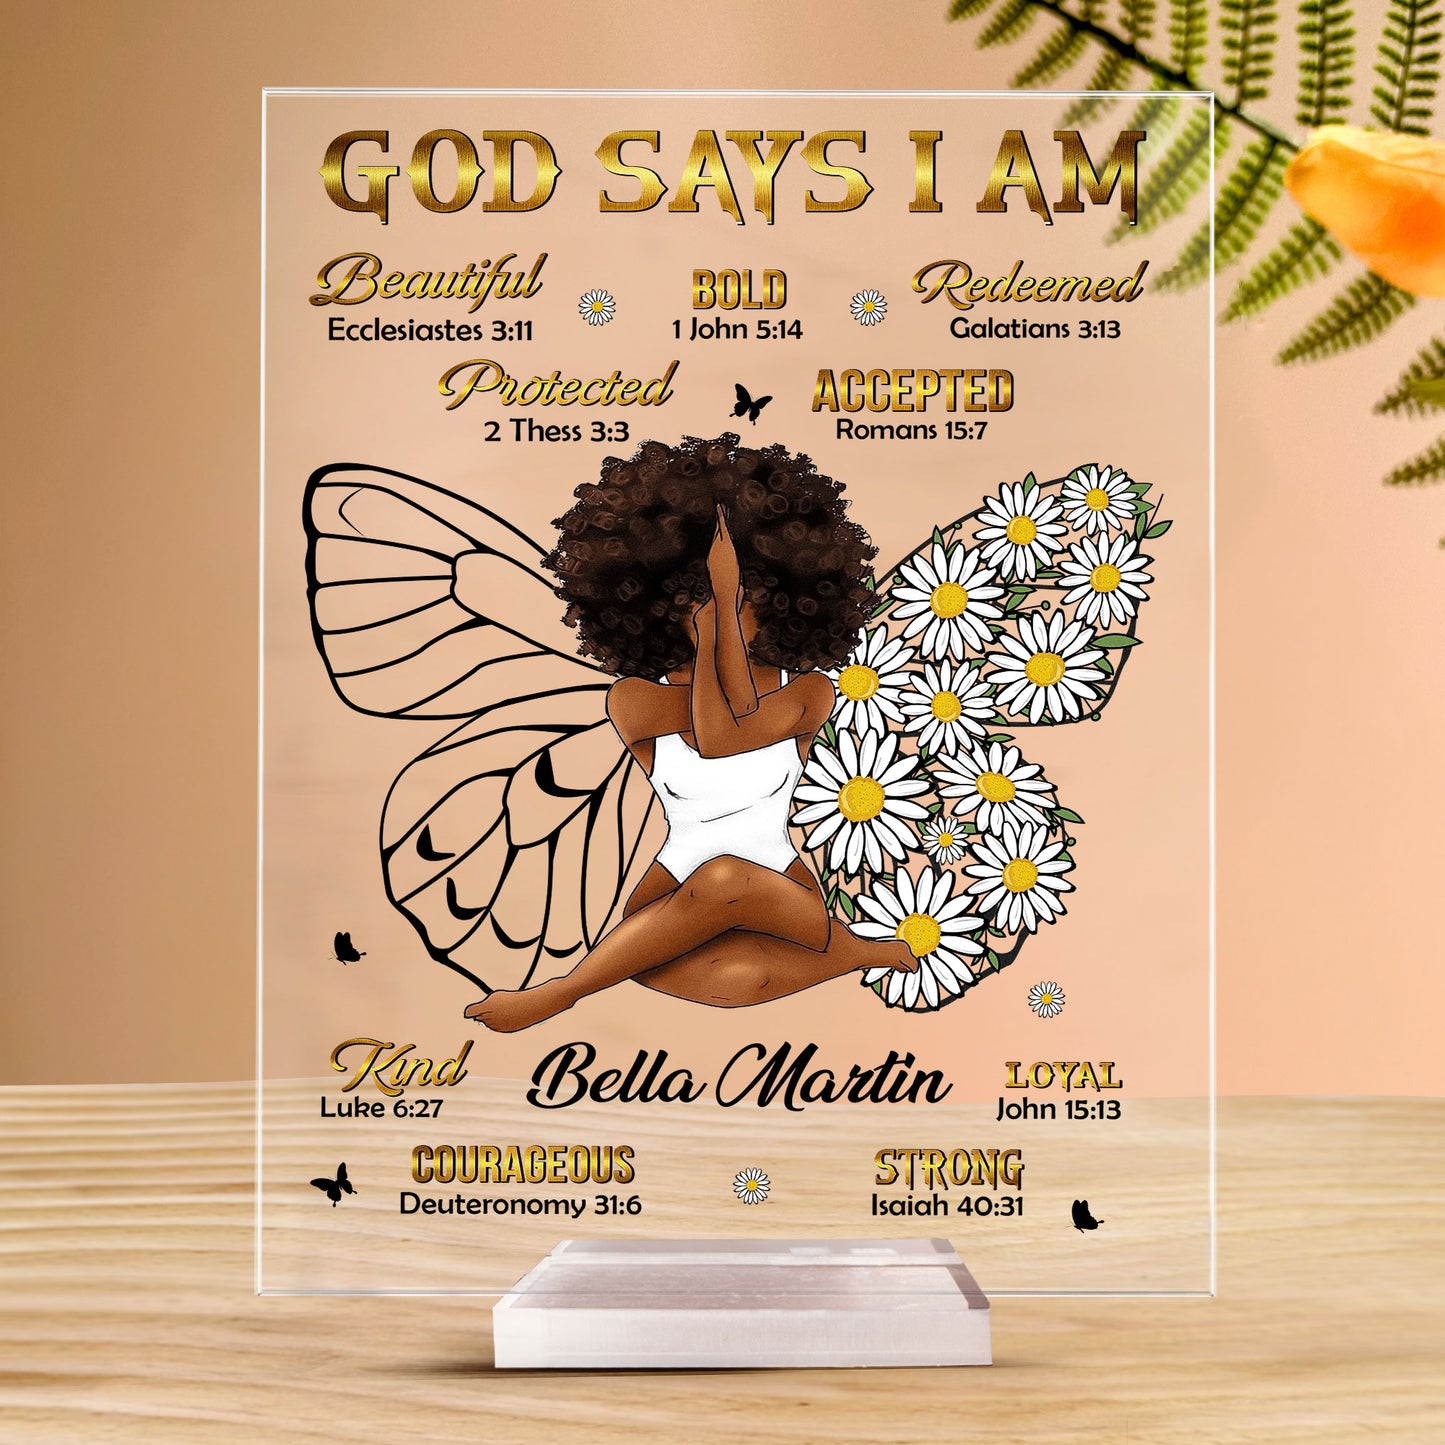 God Says I Am Beautiful Loyal Strong - Personalized Acrylic Plaque